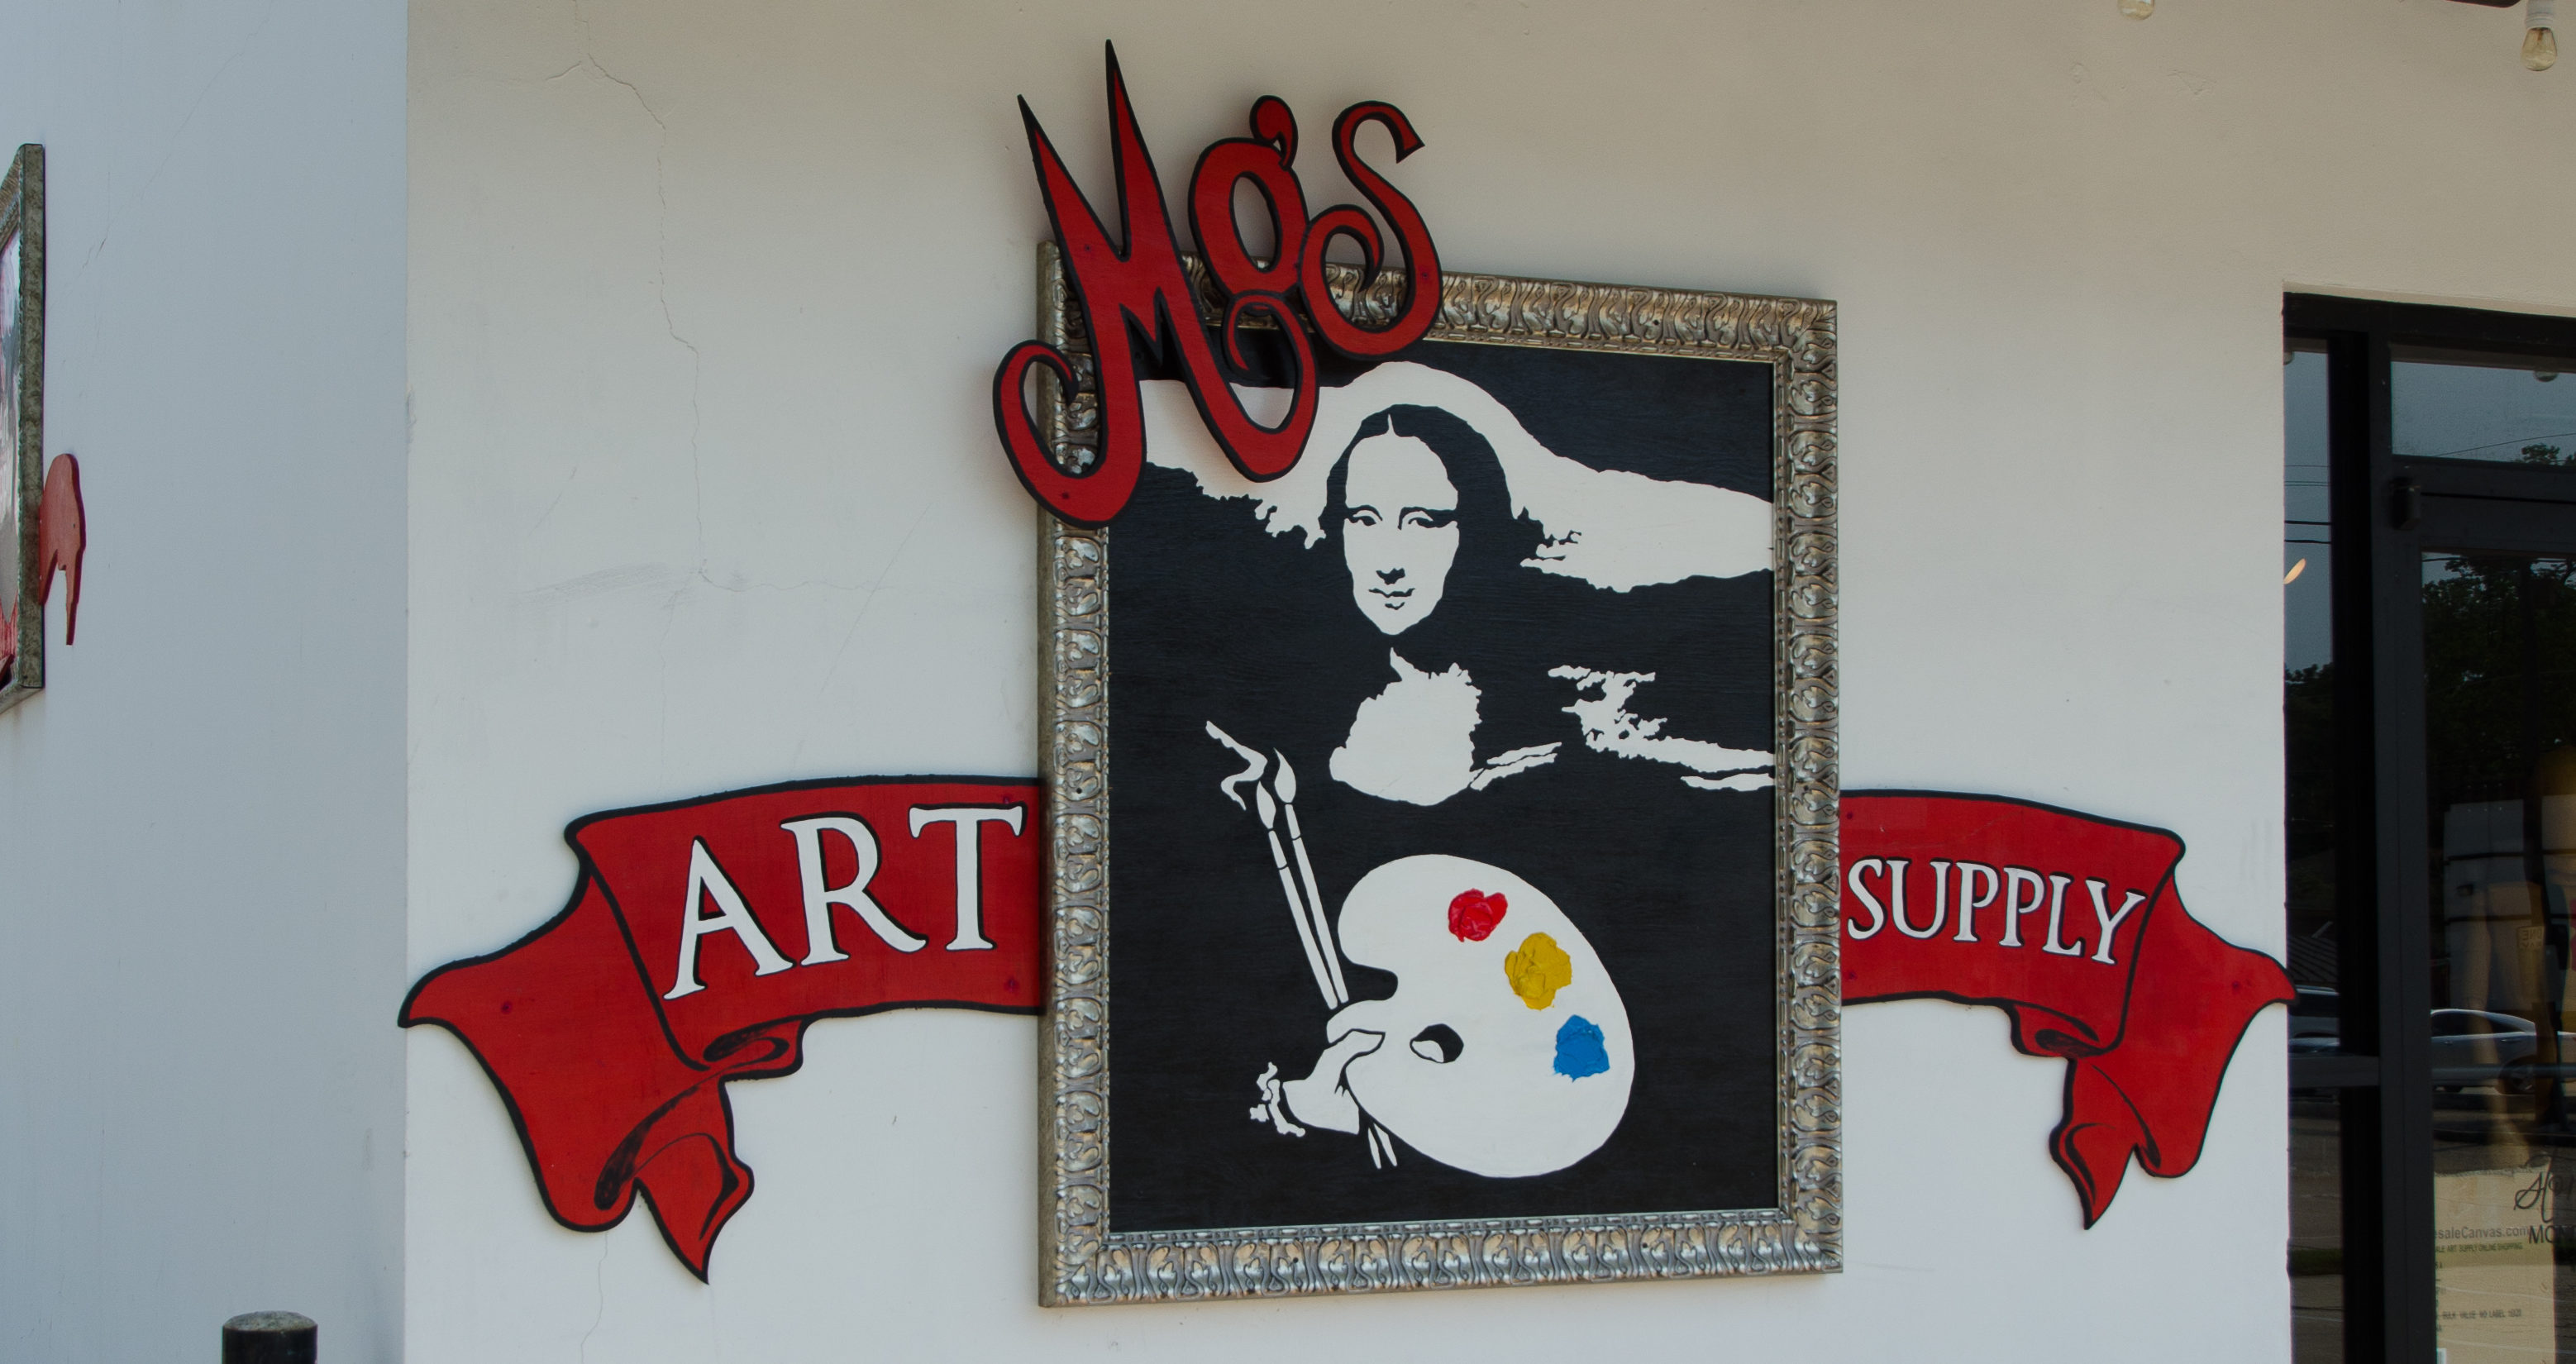 10 questions with Mo's Art Supply owner Simone Burke - inRegister